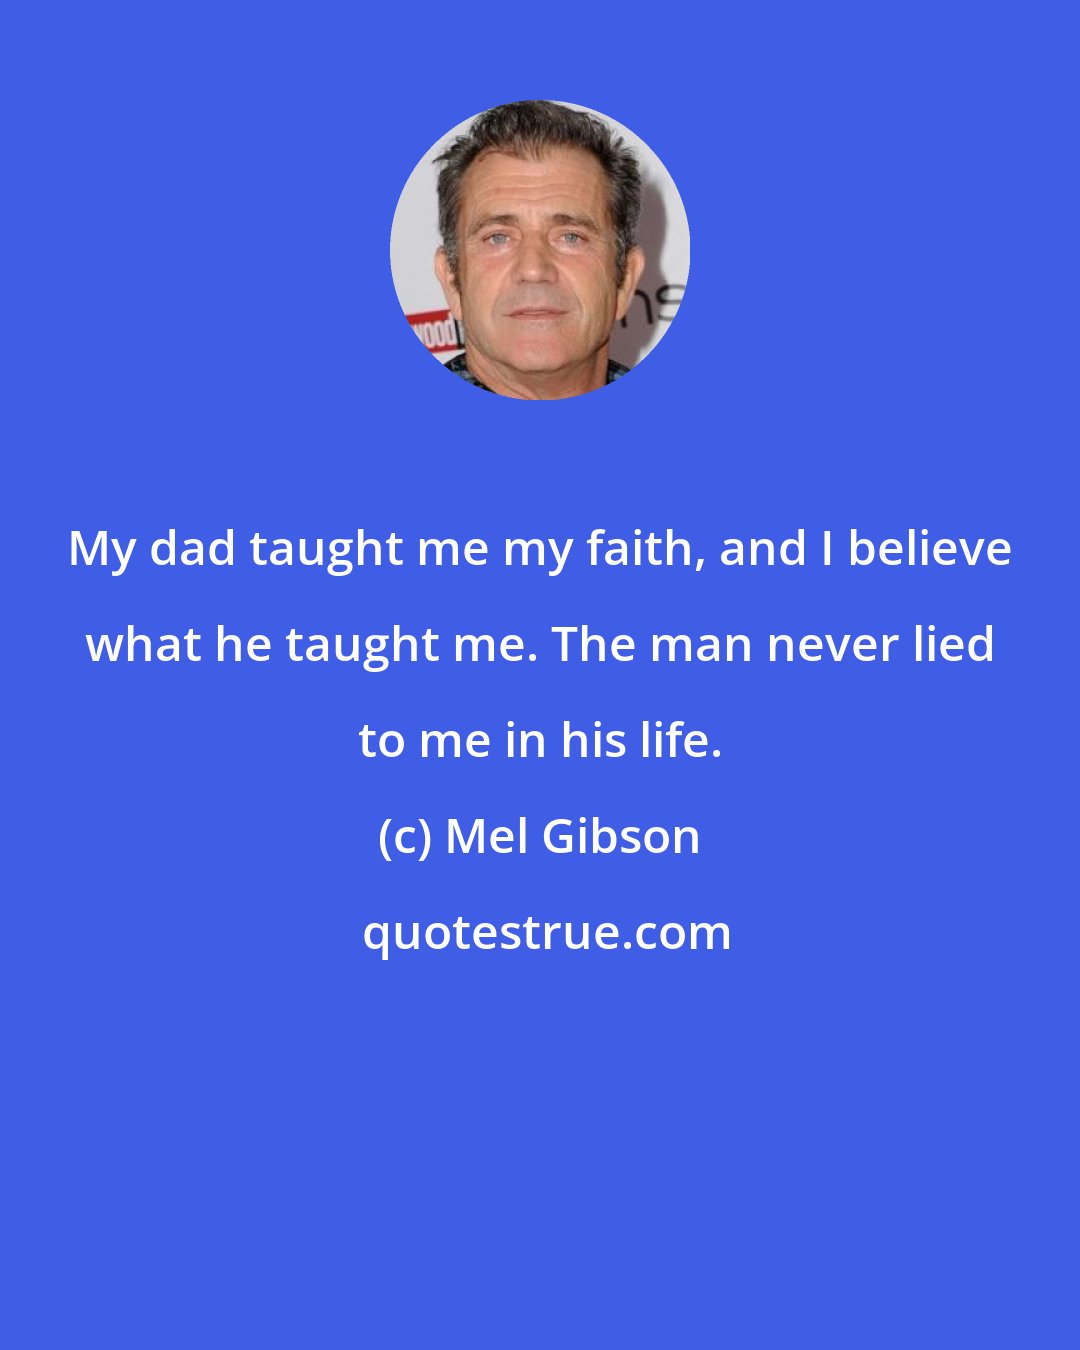 Mel Gibson: My dad taught me my faith, and I believe what he taught me. The man never lied to me in his life.